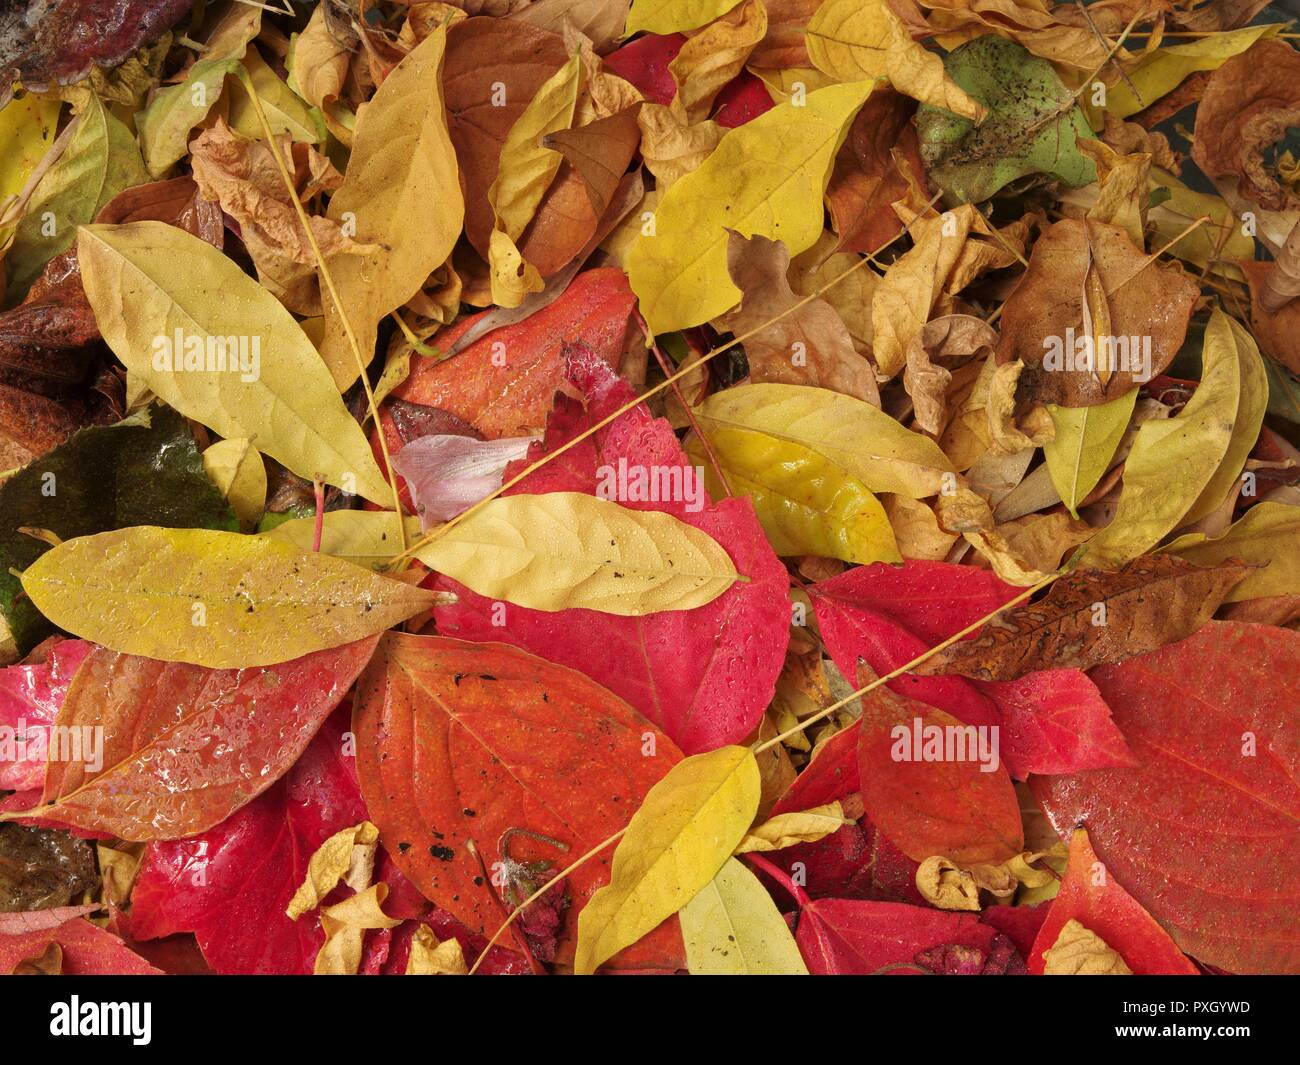 Fall Leaves, Red & Yellow, Brian Martin RMSF, Large File Size Stock Photo